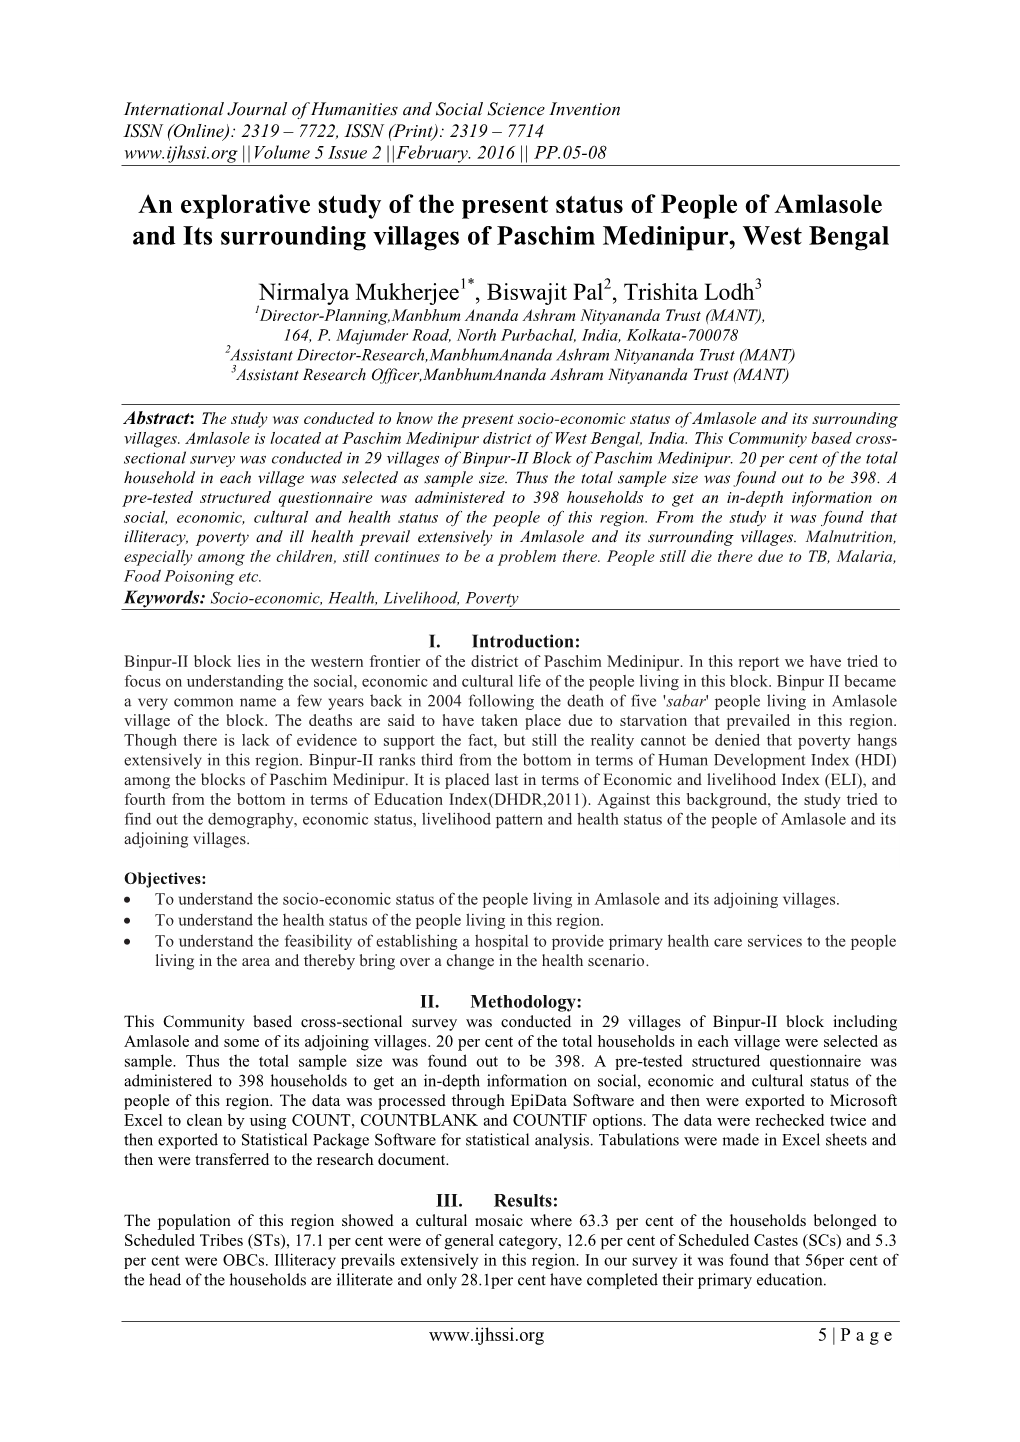 An Explorative Study of the Present Status of People of Amlasole and Its Surrounding Villages of Paschim Medinipur, West Bengal